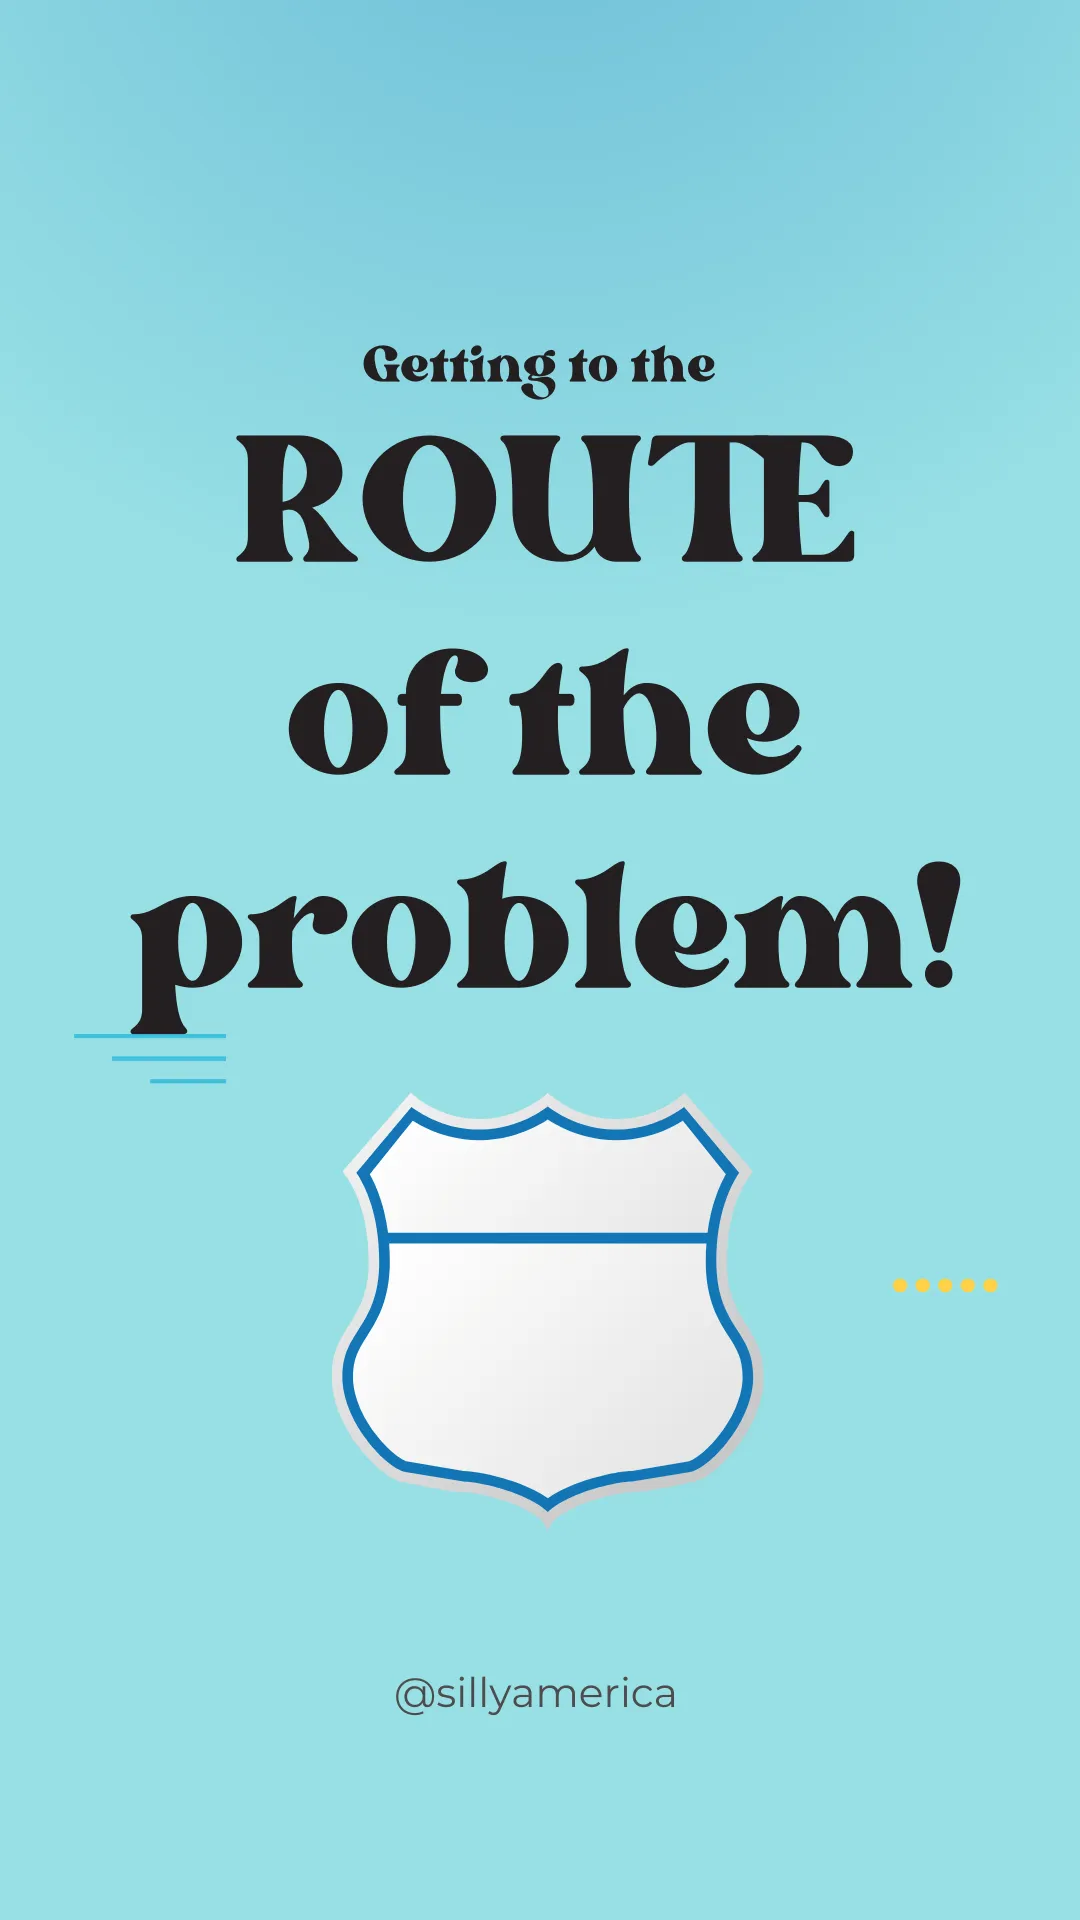 Getting to the ROUTE of the problem! - Road Trip Puns